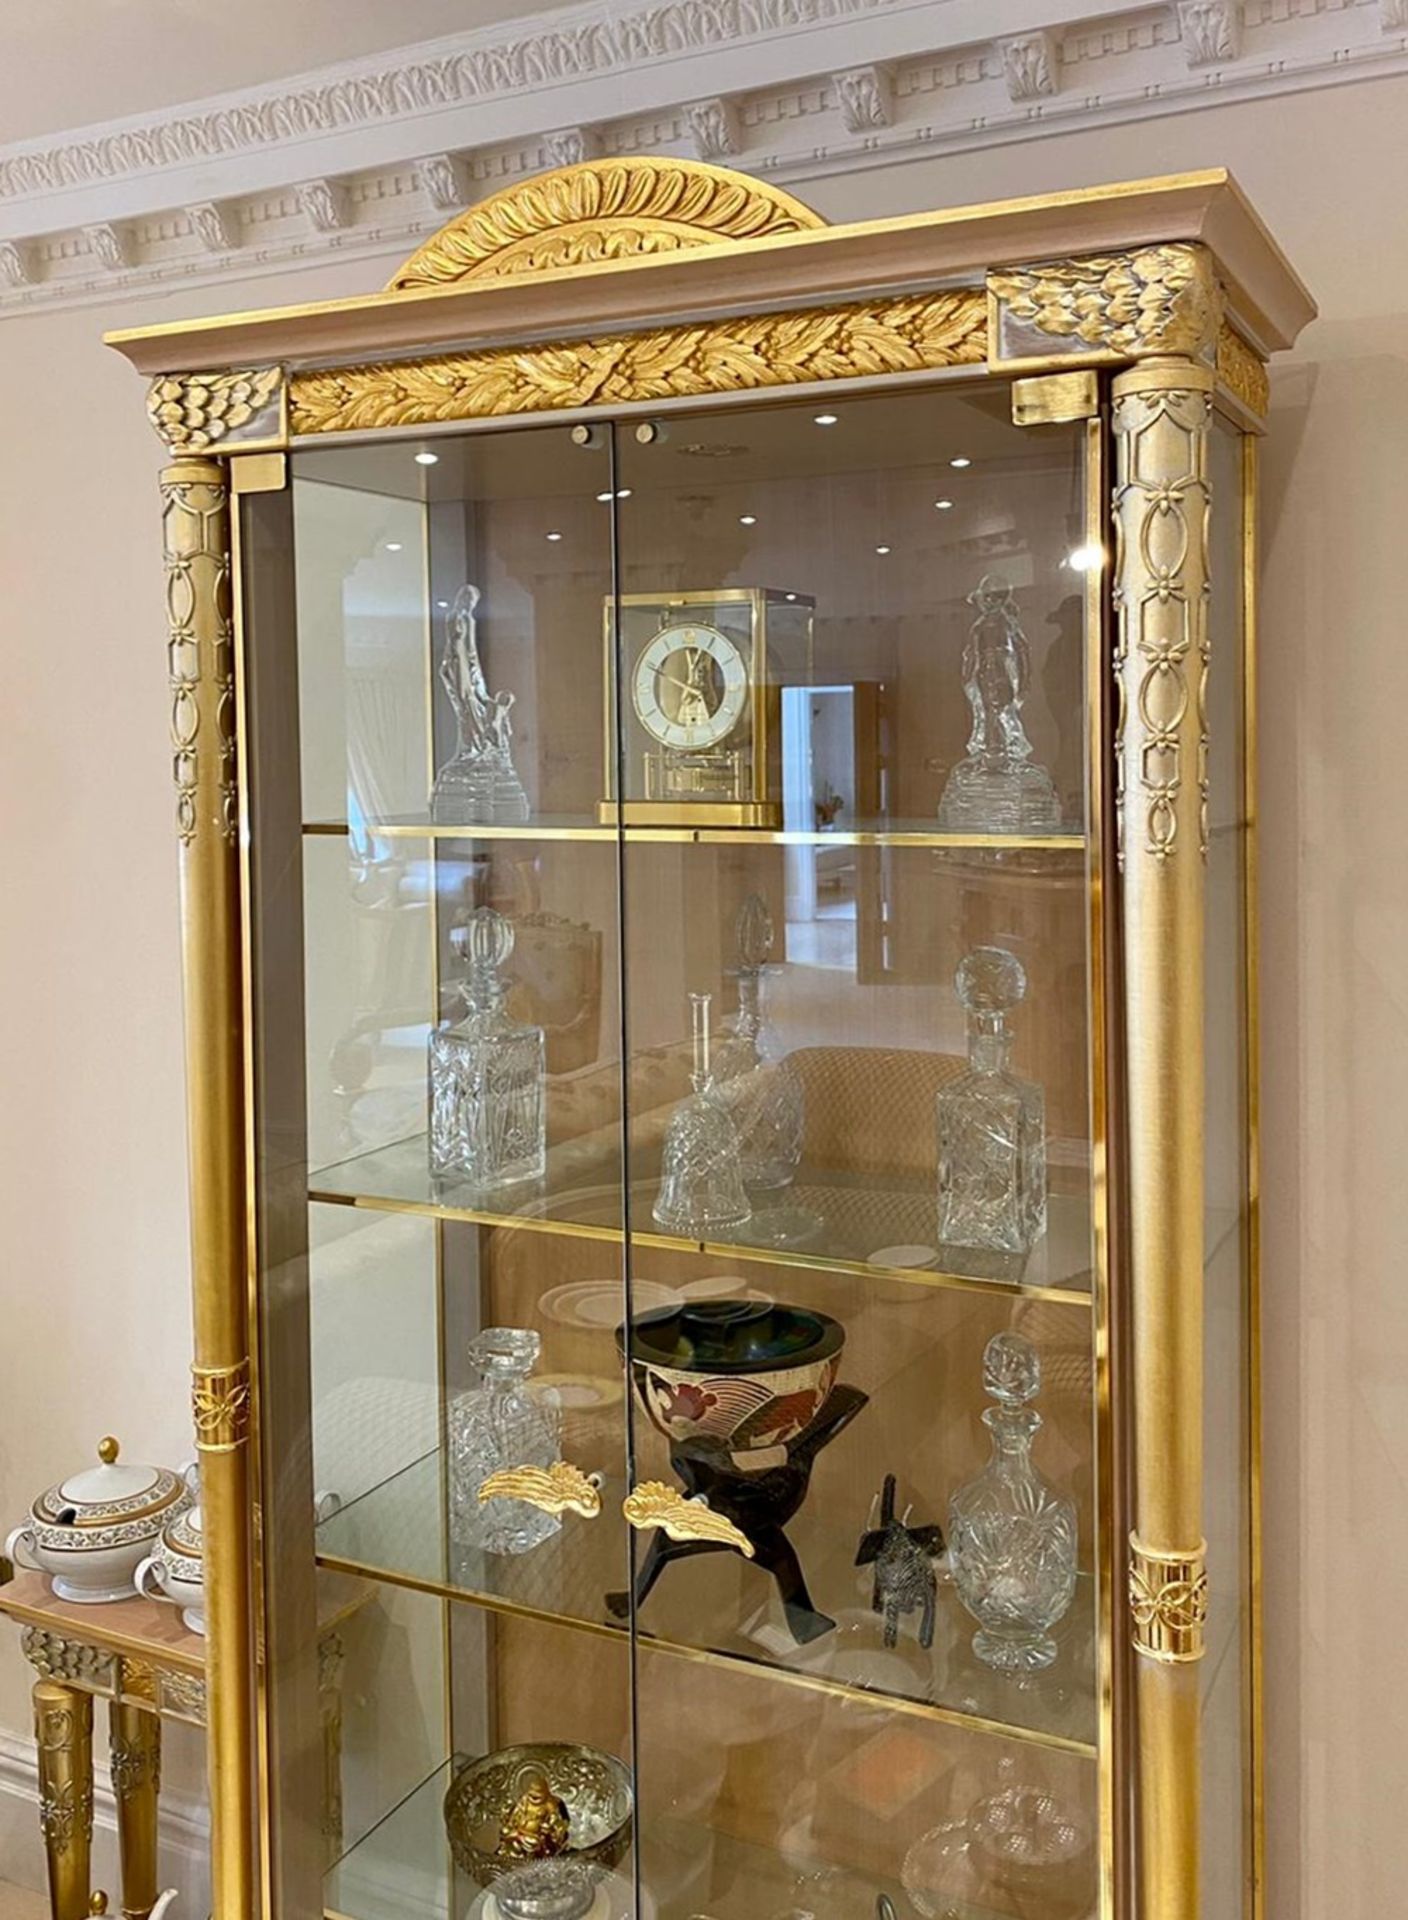 1 x Grand Showcase Upright Display Cabinet With Hand Carved Detail Finished in Gold - Features - Image 12 of 12